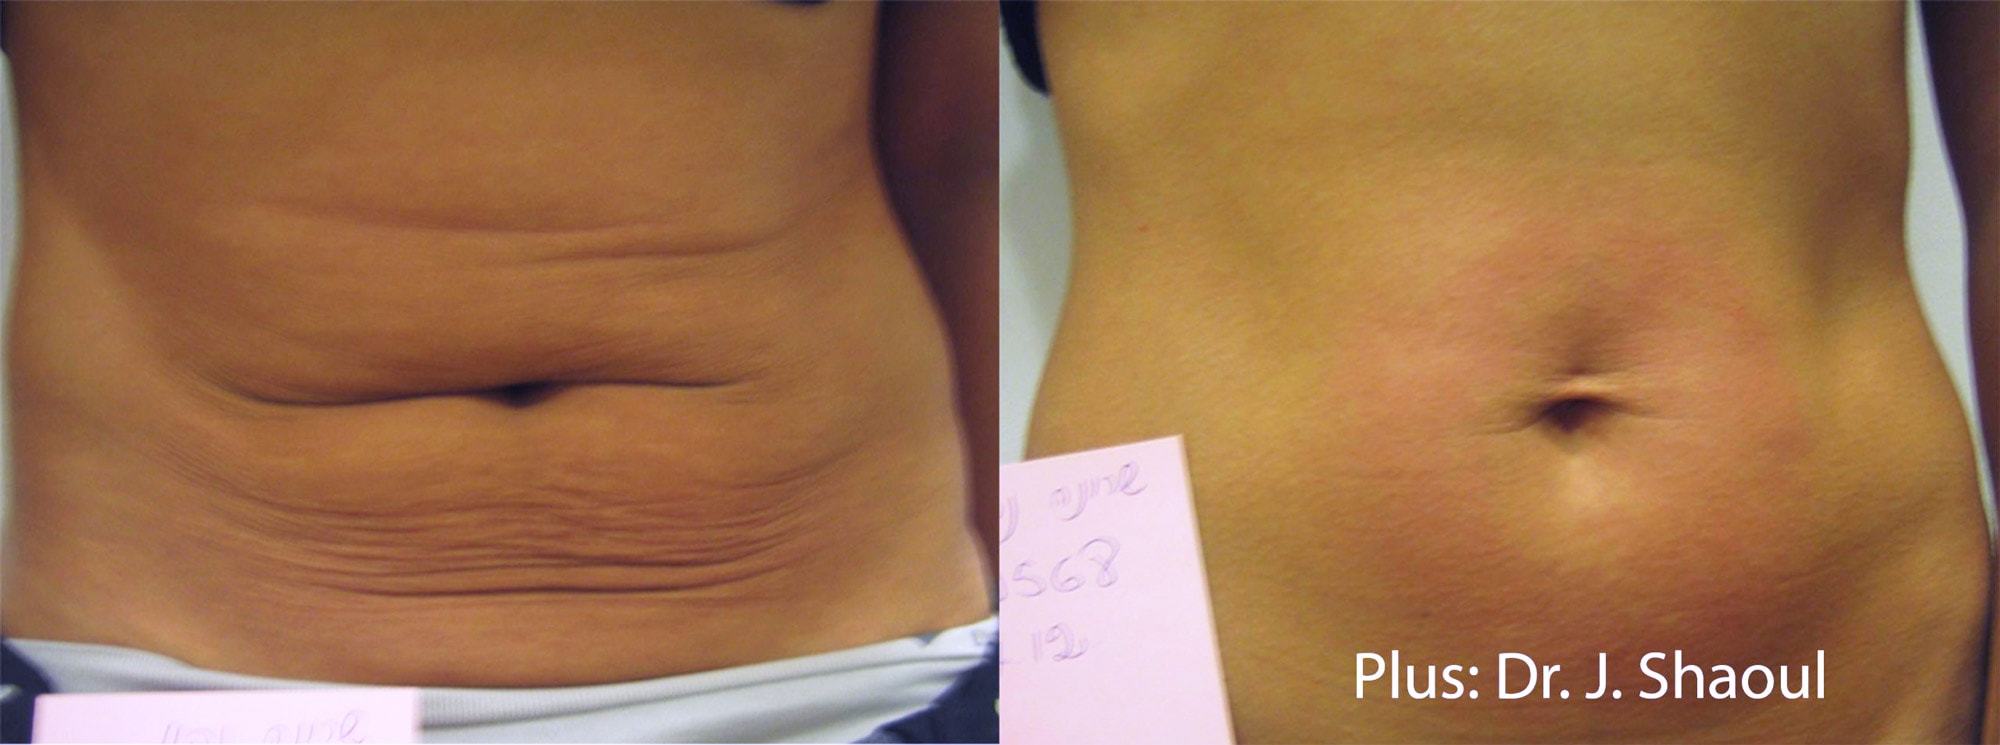 Before and After photos of Forma Plus treatments tightening loose skin and eliminating wrinkles on a woman’s abdomen